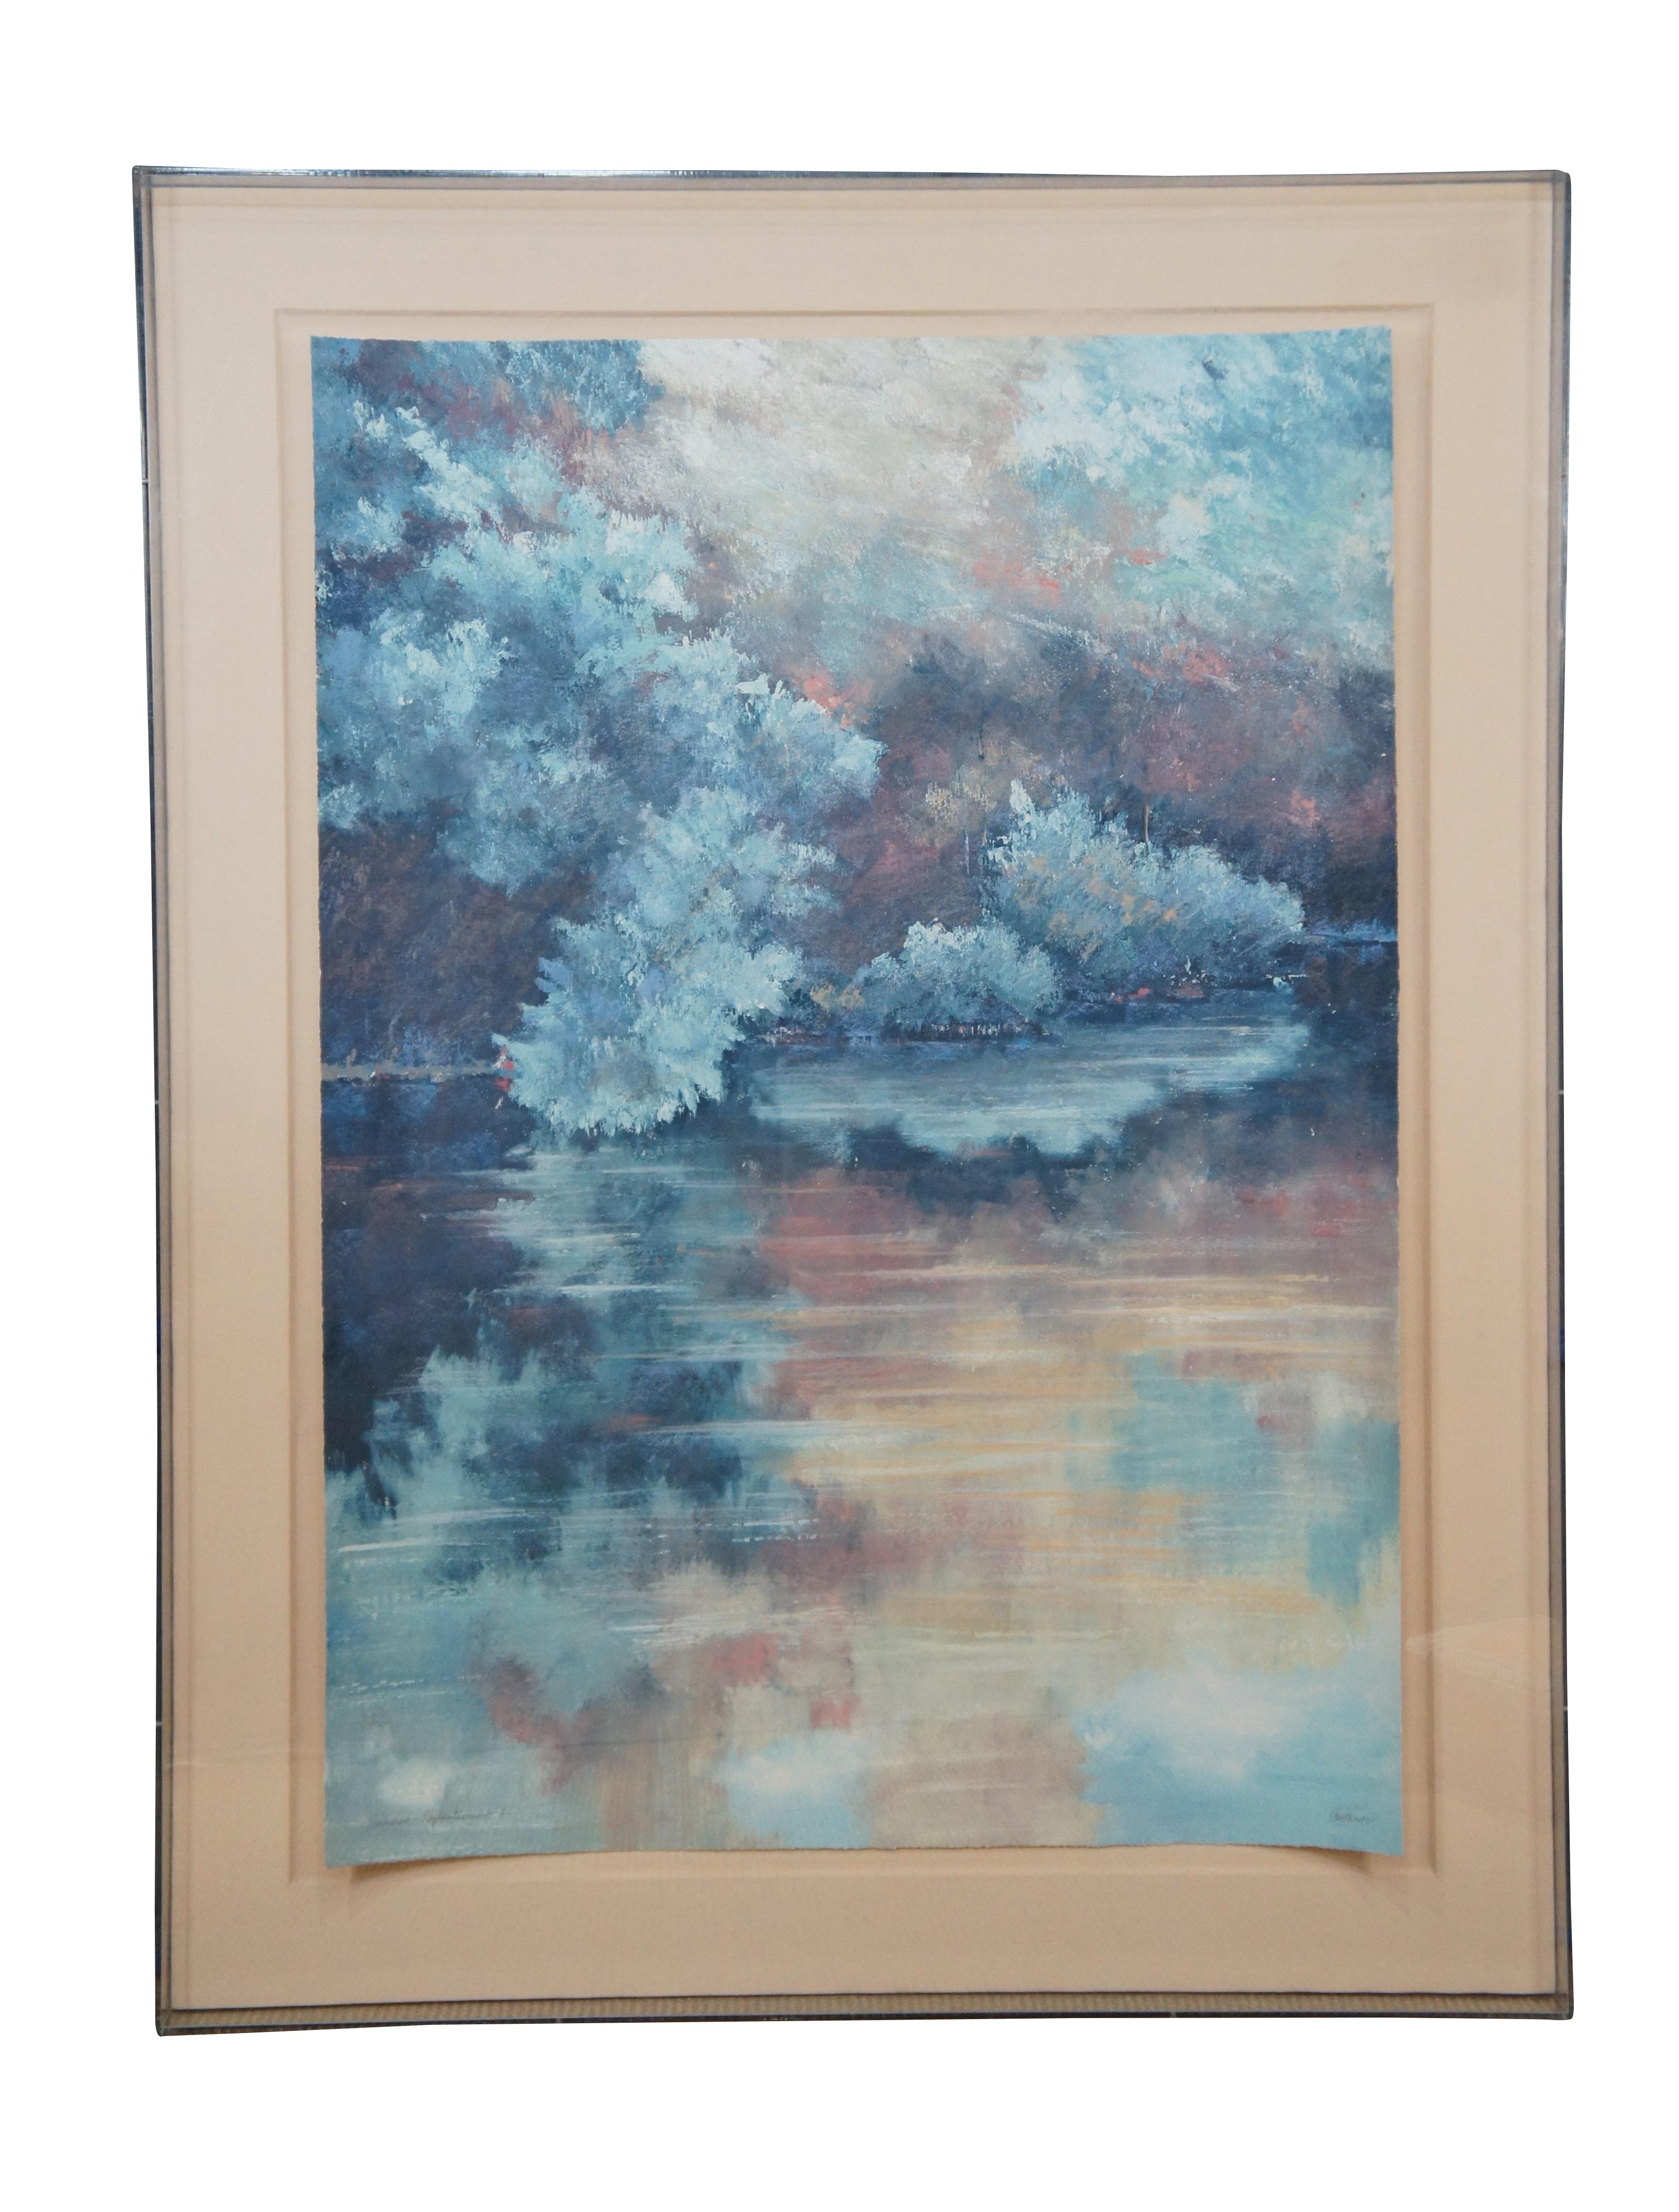 Pair of vintage large watercolor paintings of impressionist style tree lined lakes titled Summer Reflections I and Summer Reflections II, pencil signed by artist Conthonts. Both mounted in acrylic shadowboxes.

Measures: 43” x 3” x 56” / Sans